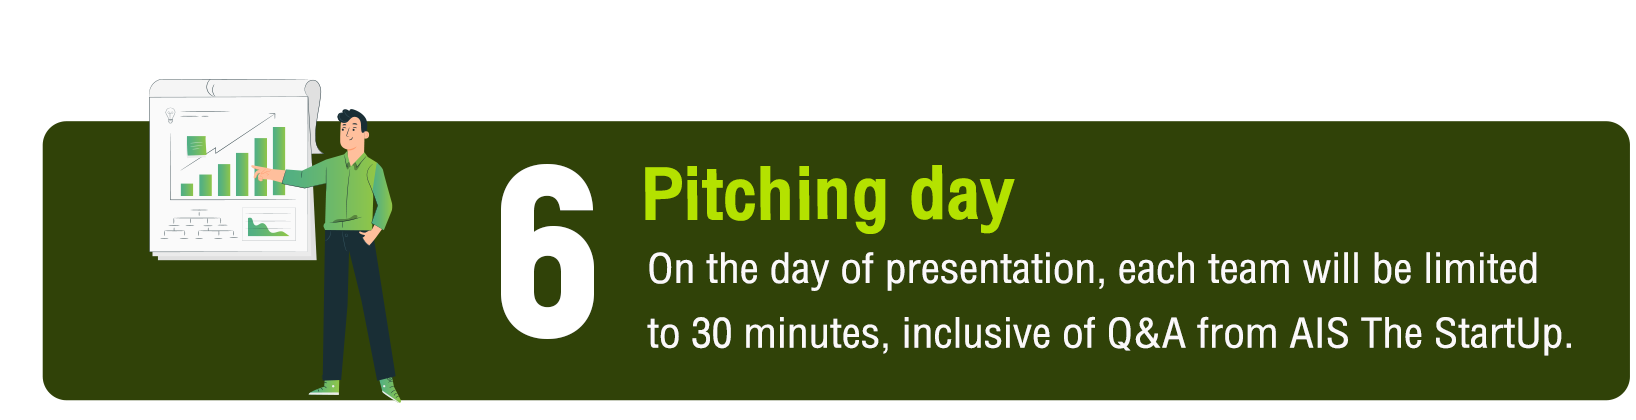 Pitching day